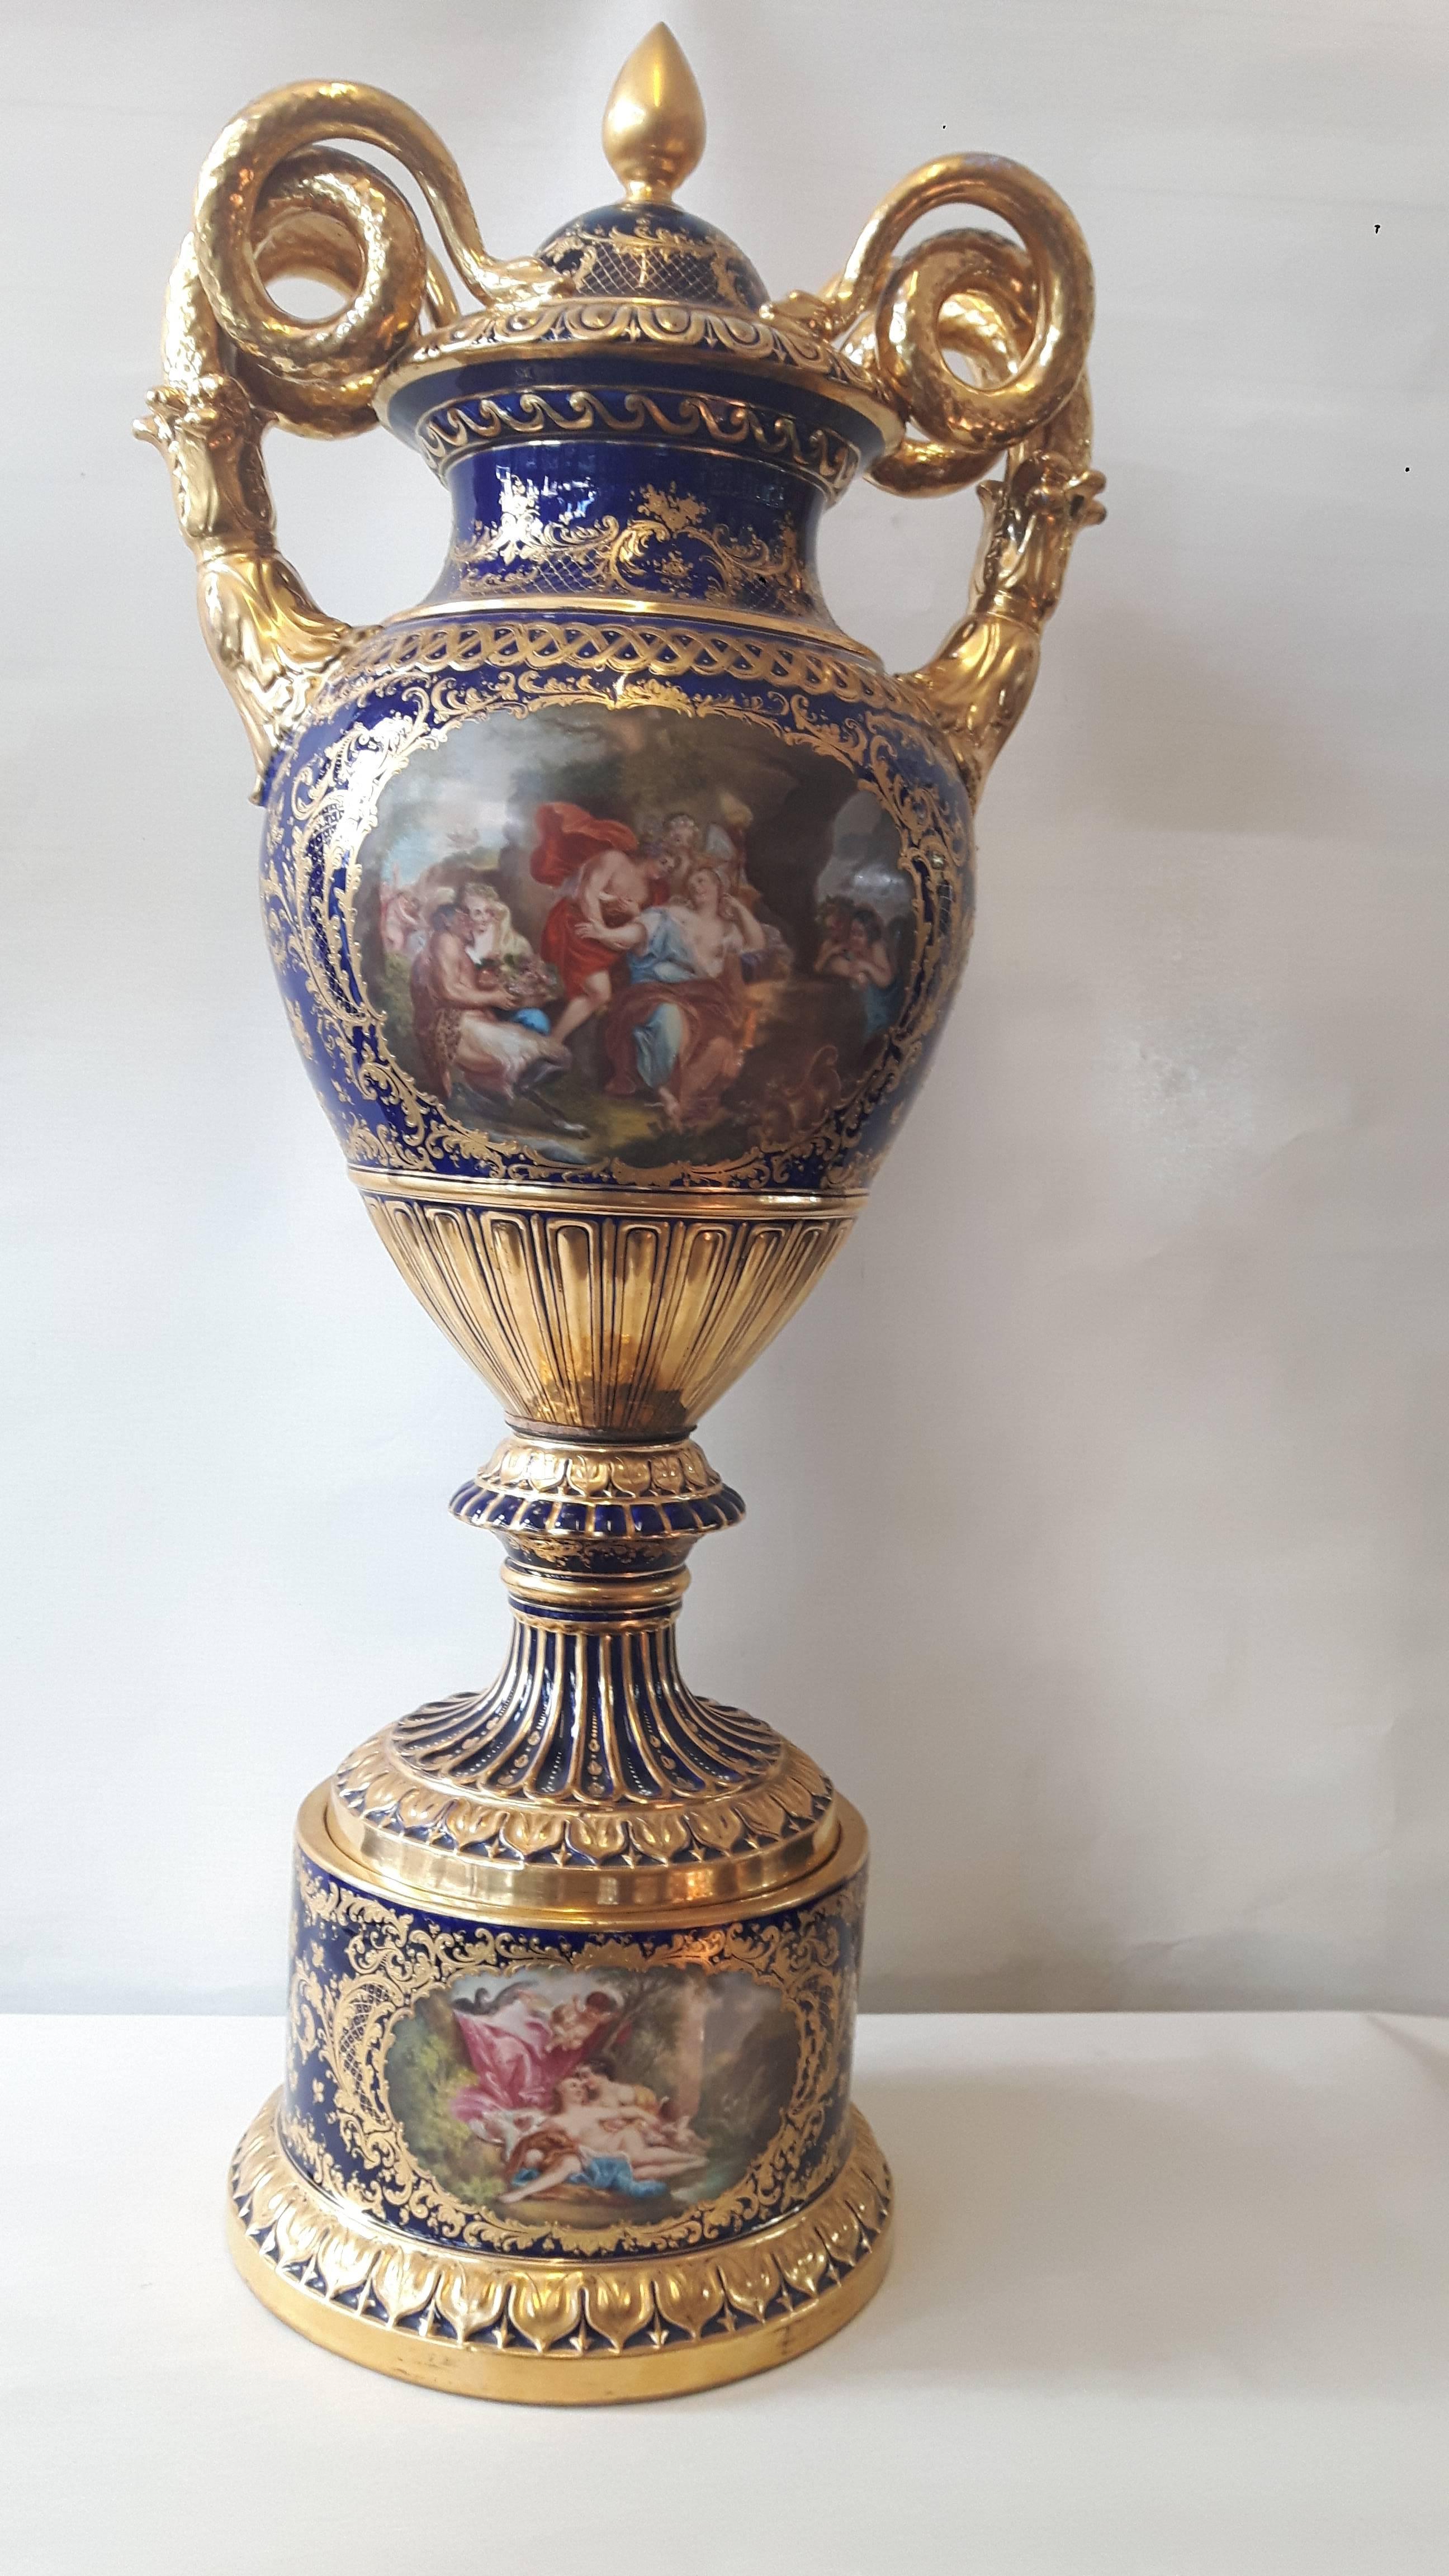 An impressive imperial-style Vienna vase, hand-painted with cartouches of Greek mythological scenes. The gilt porcelain handles are in the shape of coiled serpents and the body is elaborately covered in gilt motifs
Vienna, circa 1880.